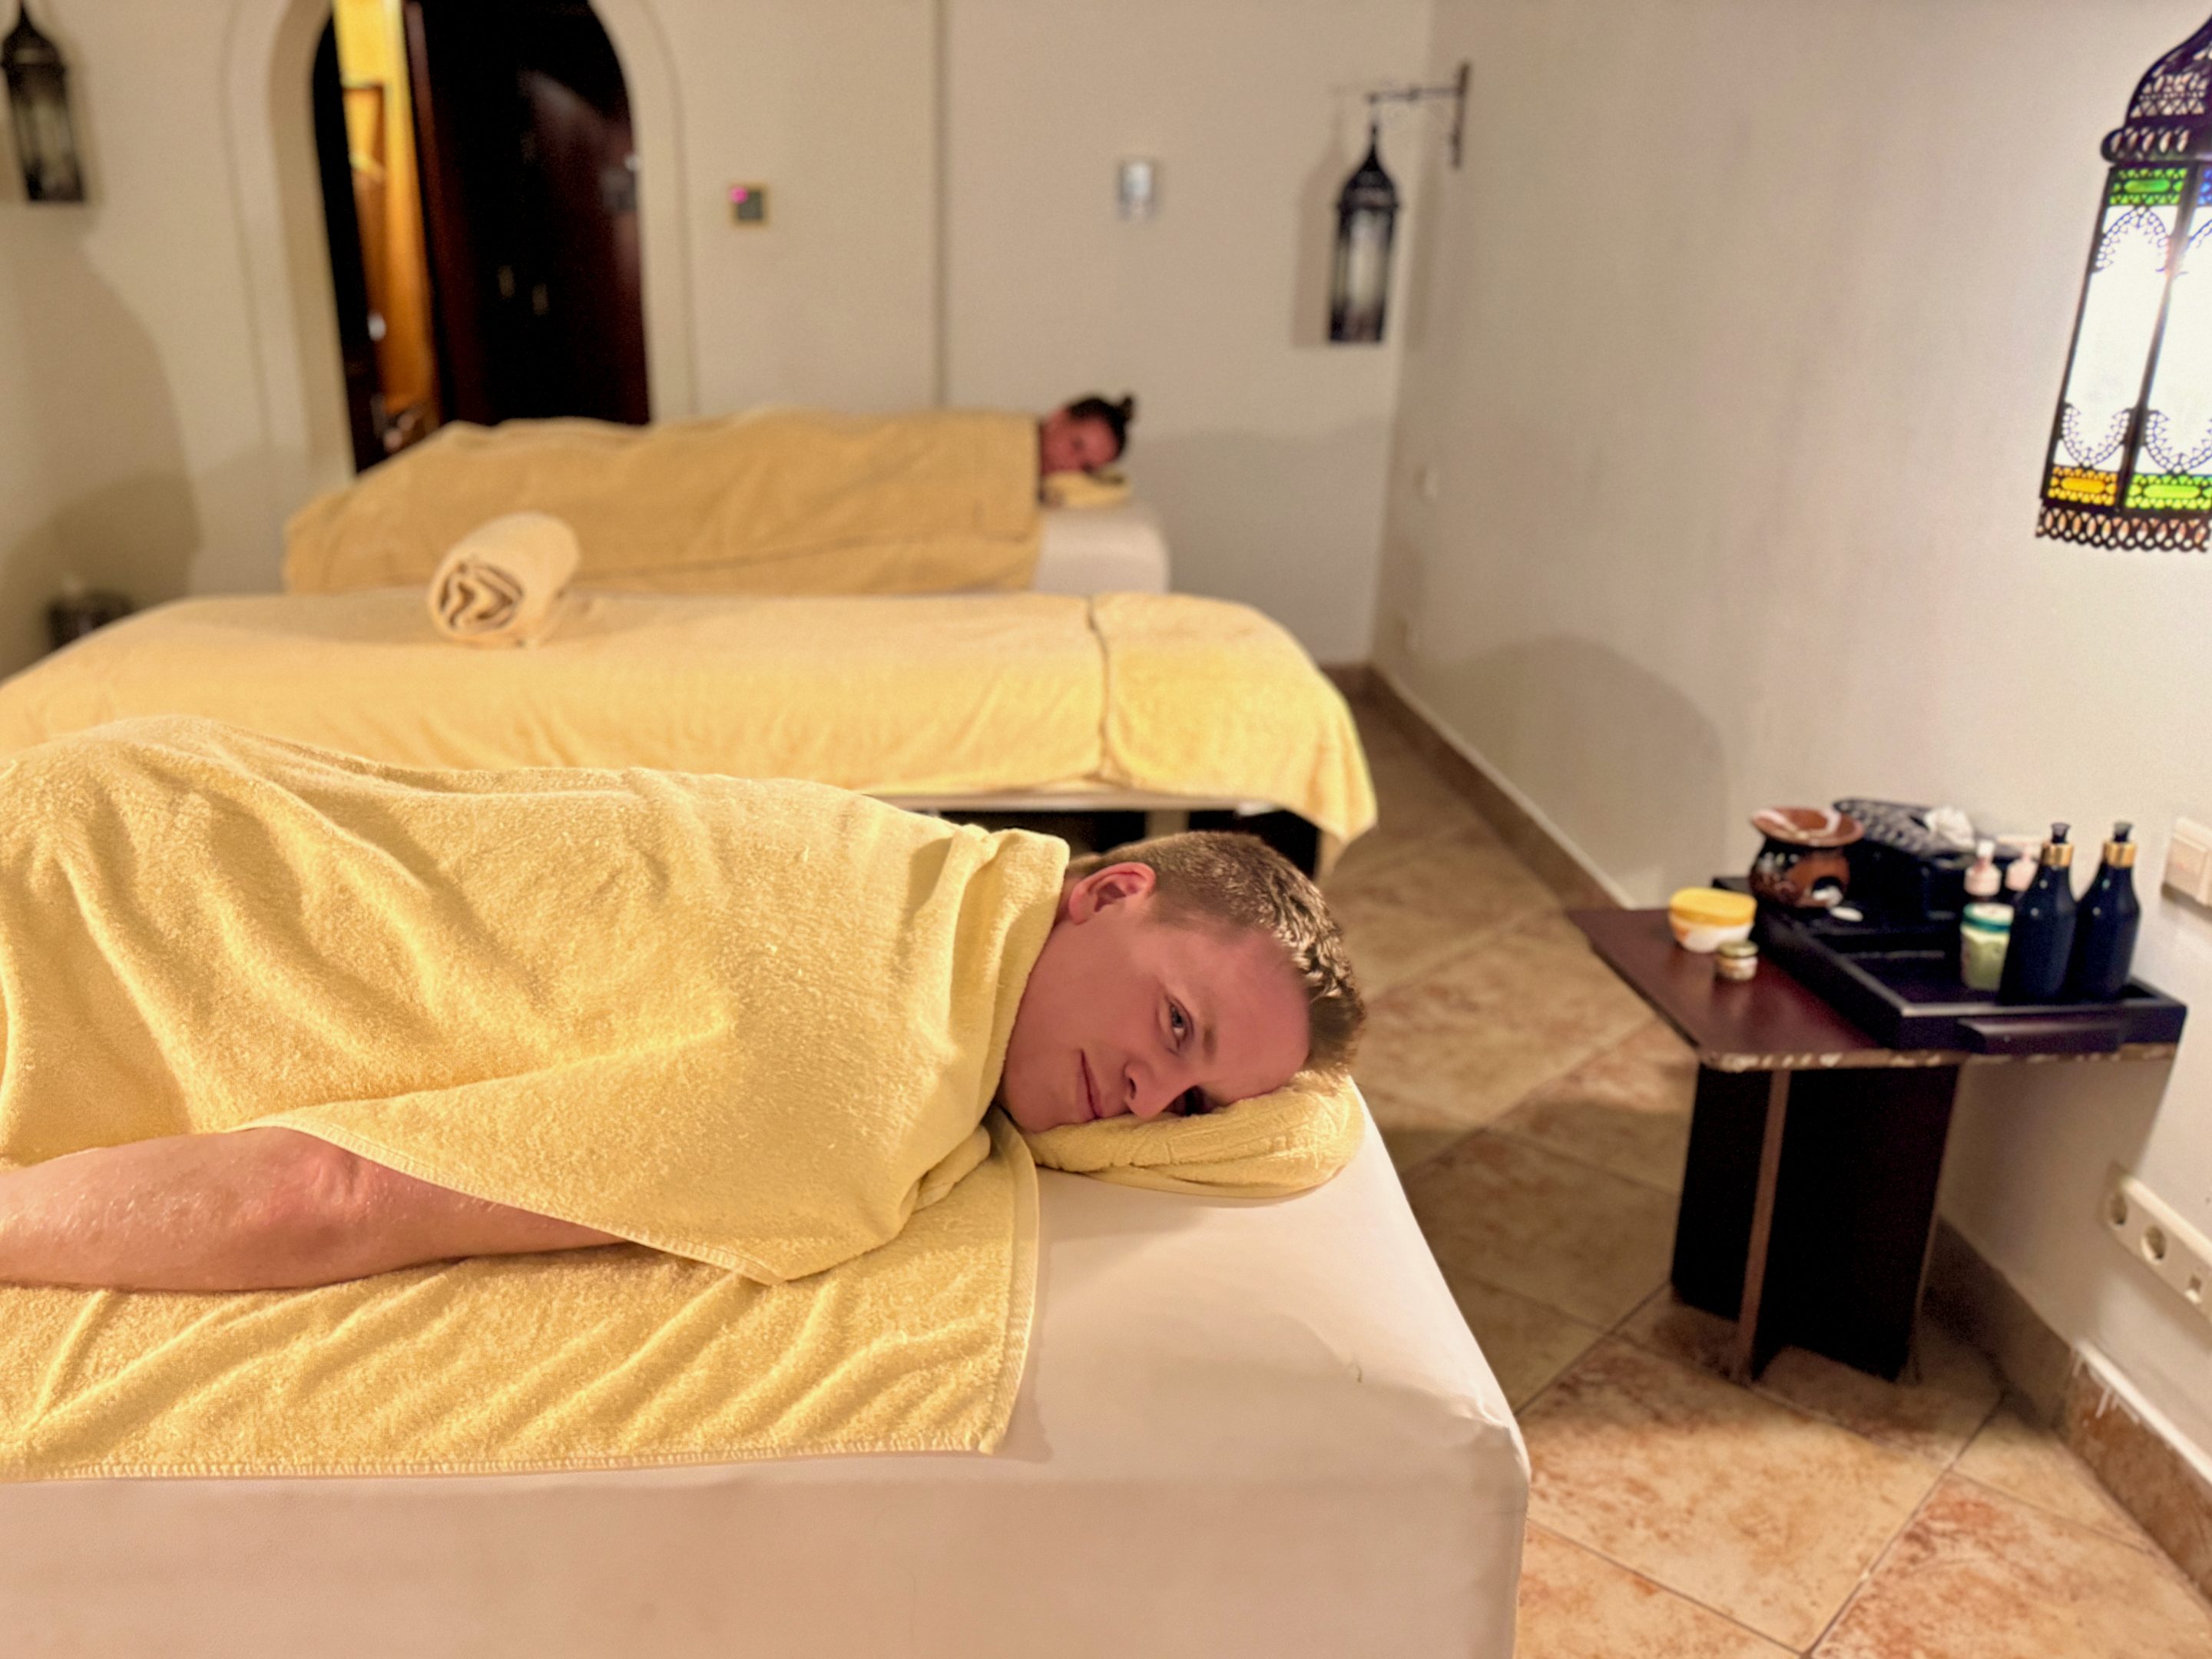 We bought a total of six massages - and negotiated the price with the seller for two days. Ultimately we paid 35 euros per massage instead of the list price of 70 euros. Hilton Marsa Alam Nubian Resort Reviews